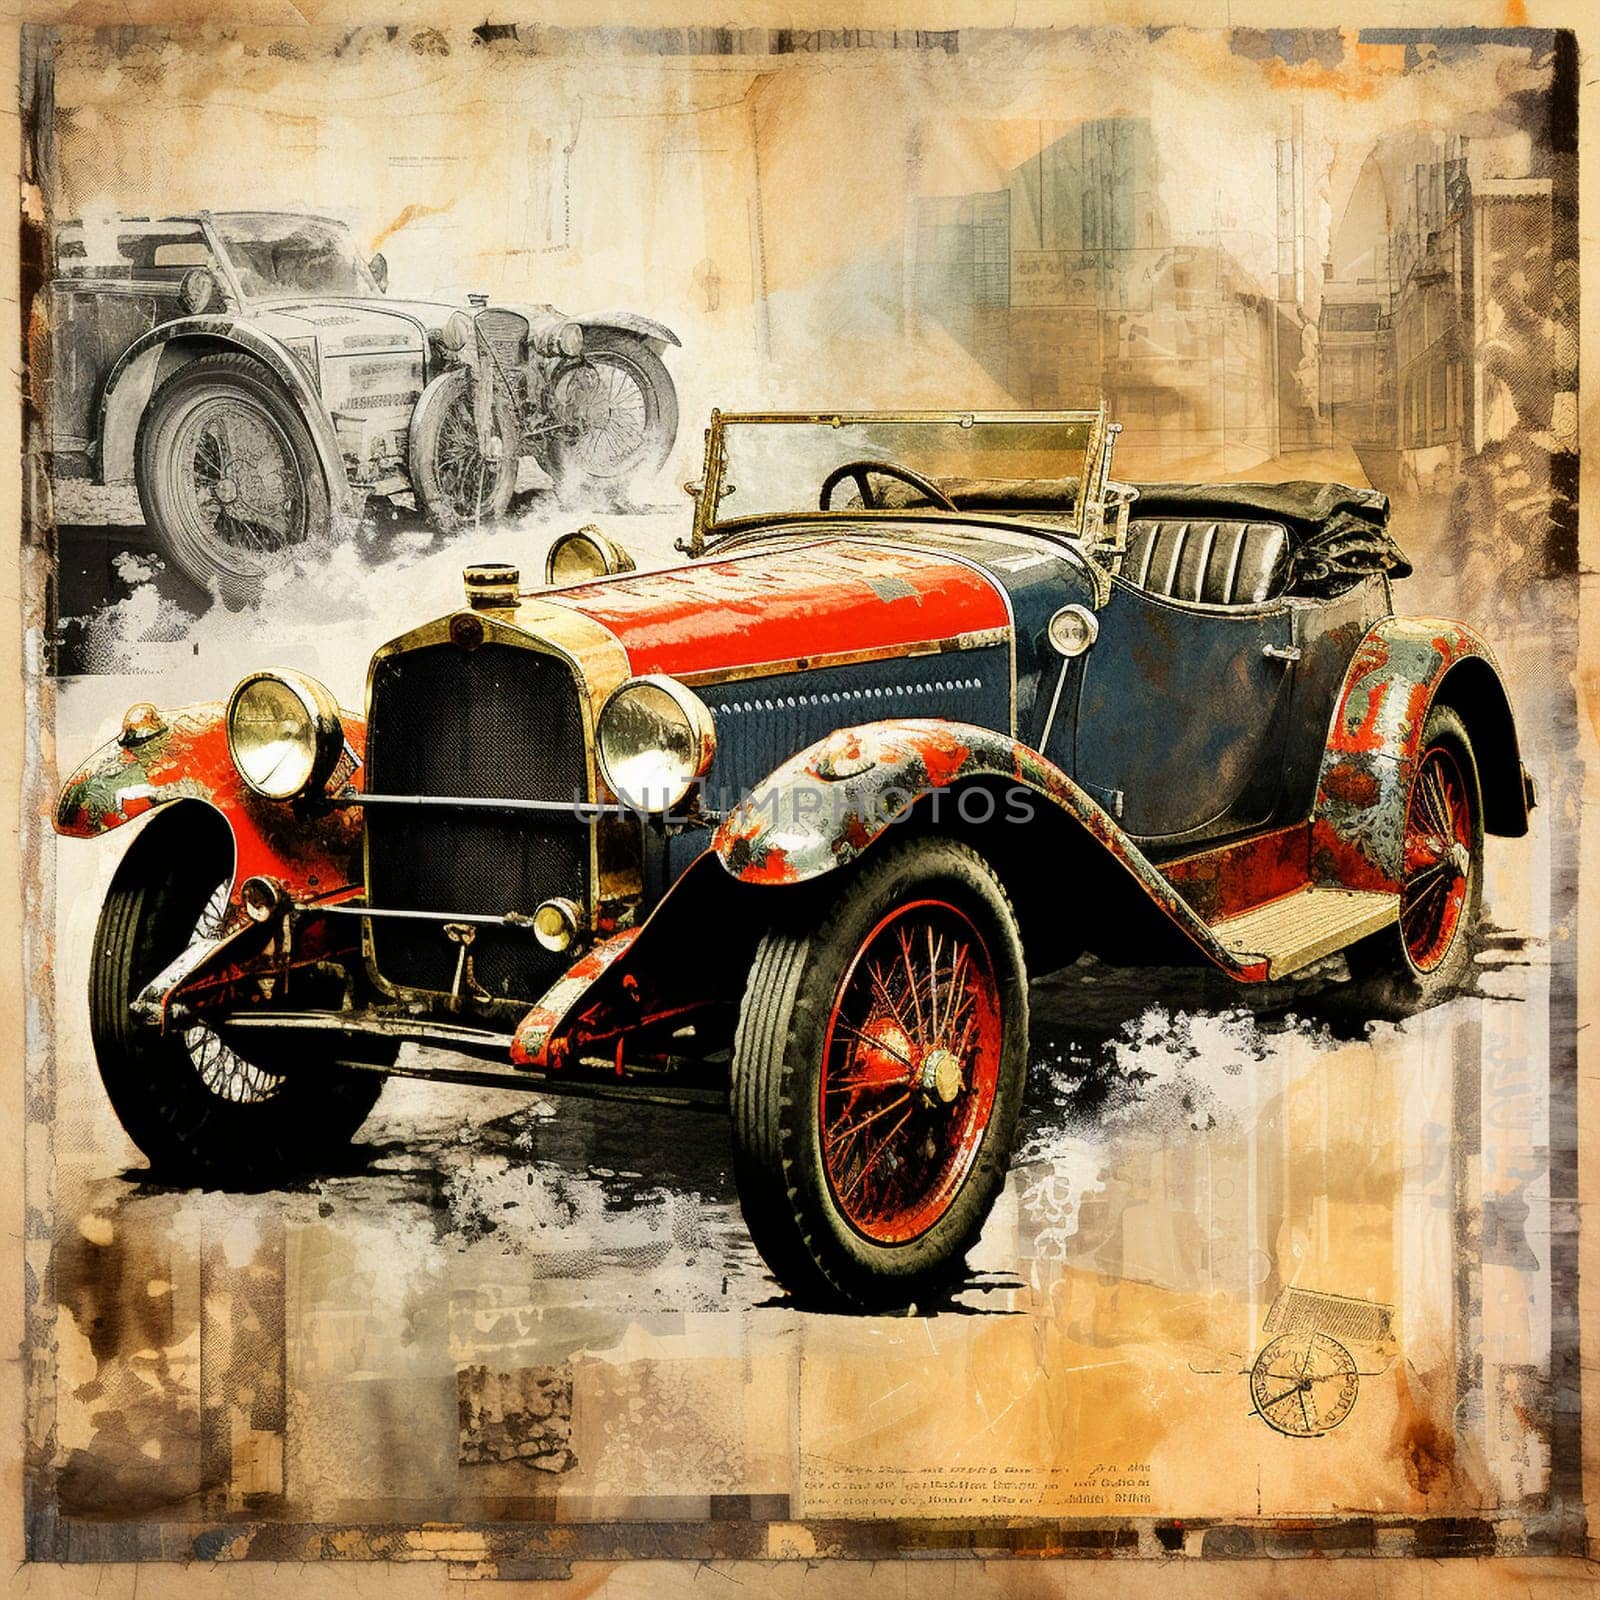 Embark on a thrilling journey through time with this art collage featuring vintage cars from various eras! Each car is intricately detailed with unique characteristics that evoke the essence of its respective time period. The composition exudes a sense of motion and excitement, capturing the viewer's imagination as they travel through different decades. Vibrant colors, dynamic perspectives, and visually captivating elements make this image stand out and grab attention on microstock sites.